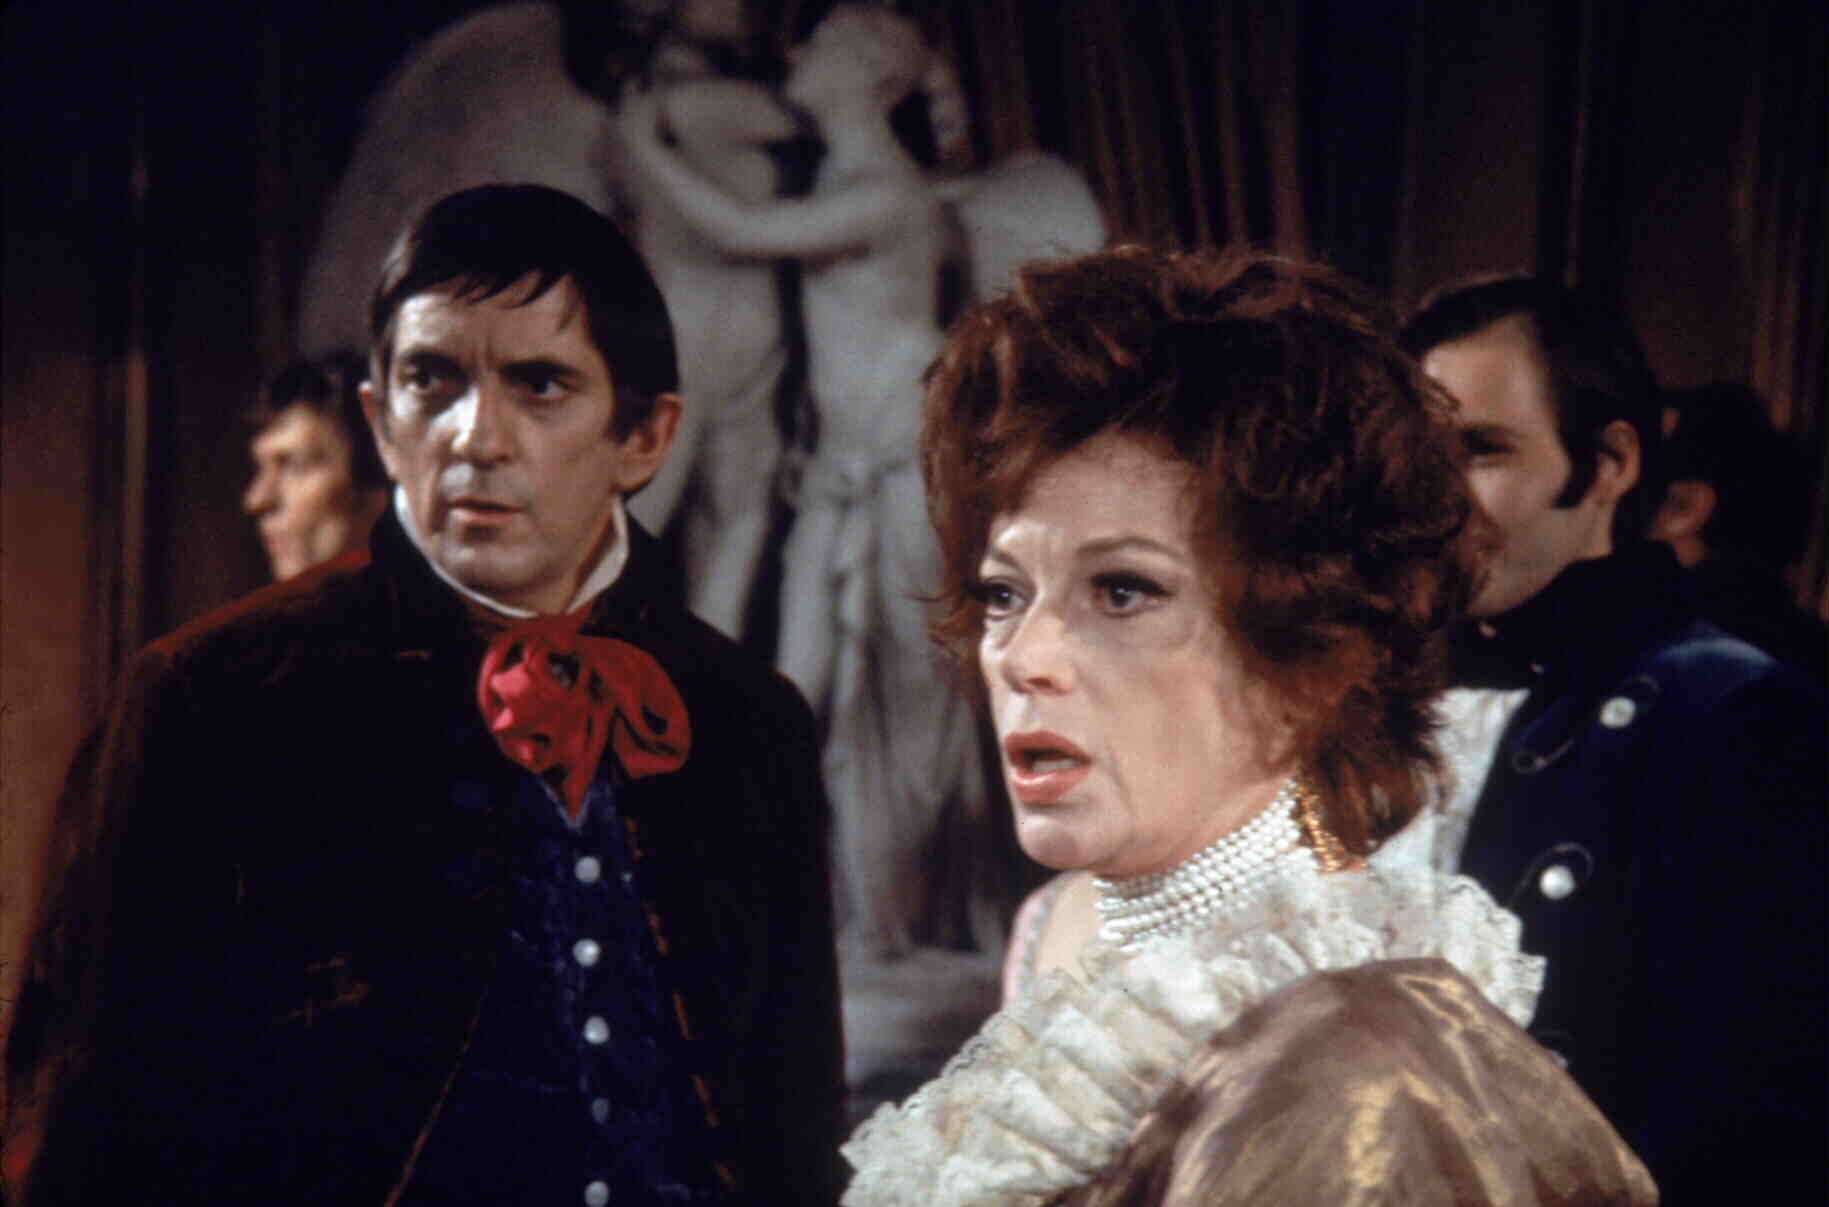 (l to r) The vampire Barnabas Collins (Jonathan Frid) and Dr Julia Hoffman (Grayson Hall) in House of Dark Shadows (1970)